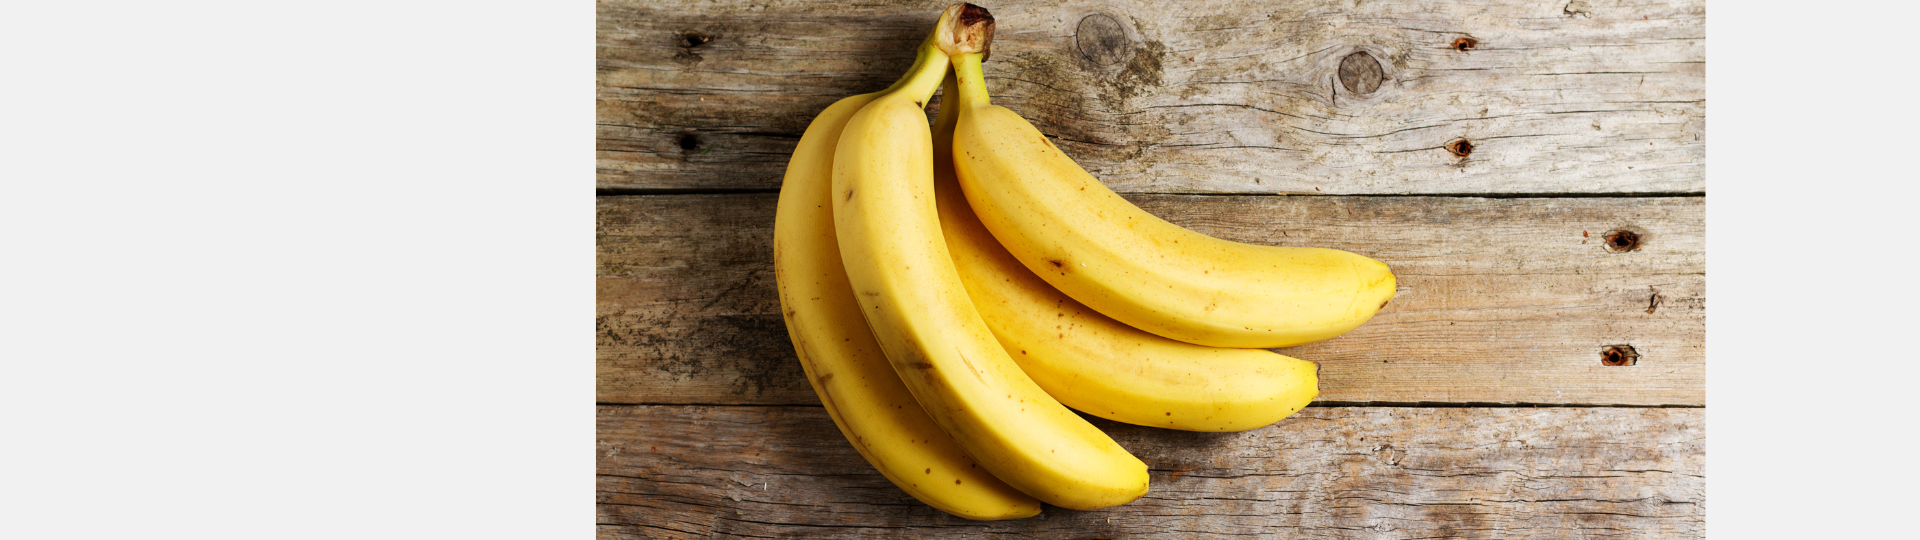 banana bunch on a wood background